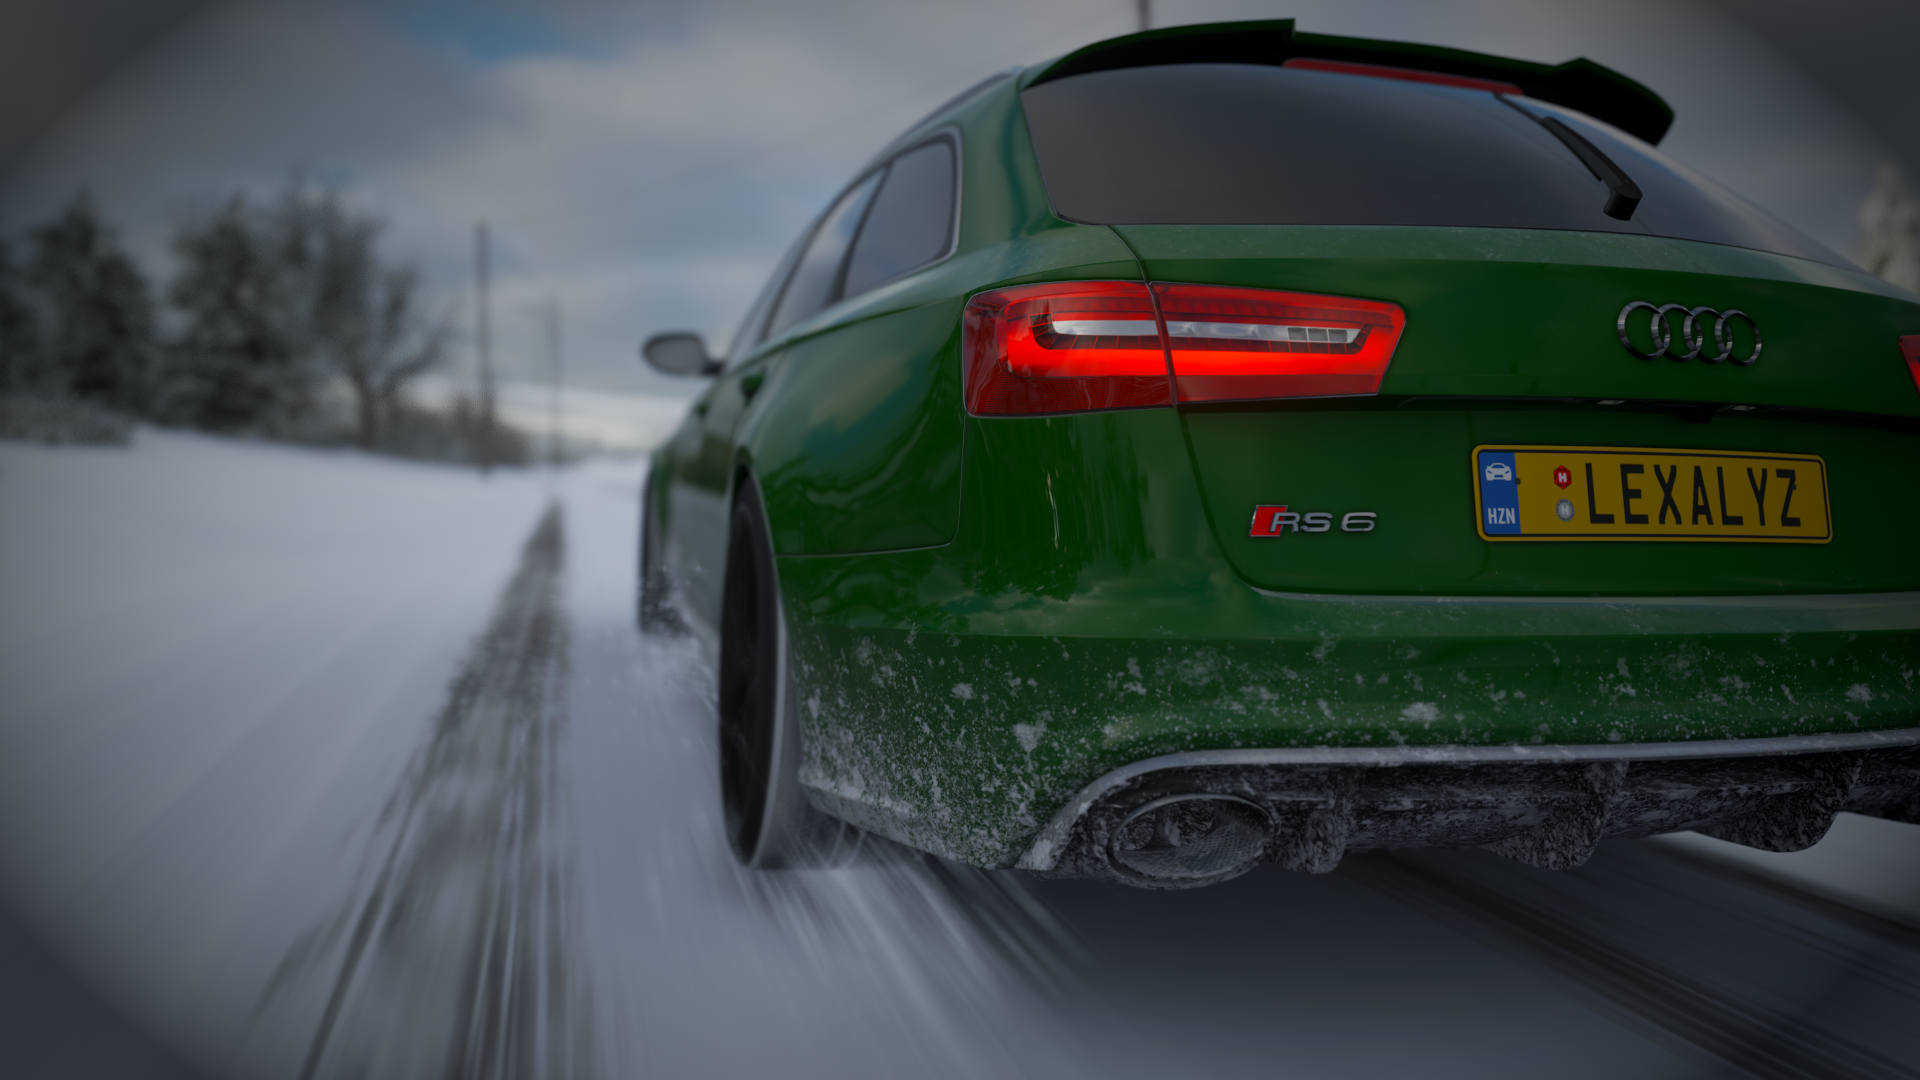 General 1920x1080 Audi snow Forza Horizon 4 car video game art screen shot video games vehicle rear view taillights sky clouds driving licence plates road snow covered CGI Audi RS6 German cars station wagon Volkswagen Group PlaygroundGames